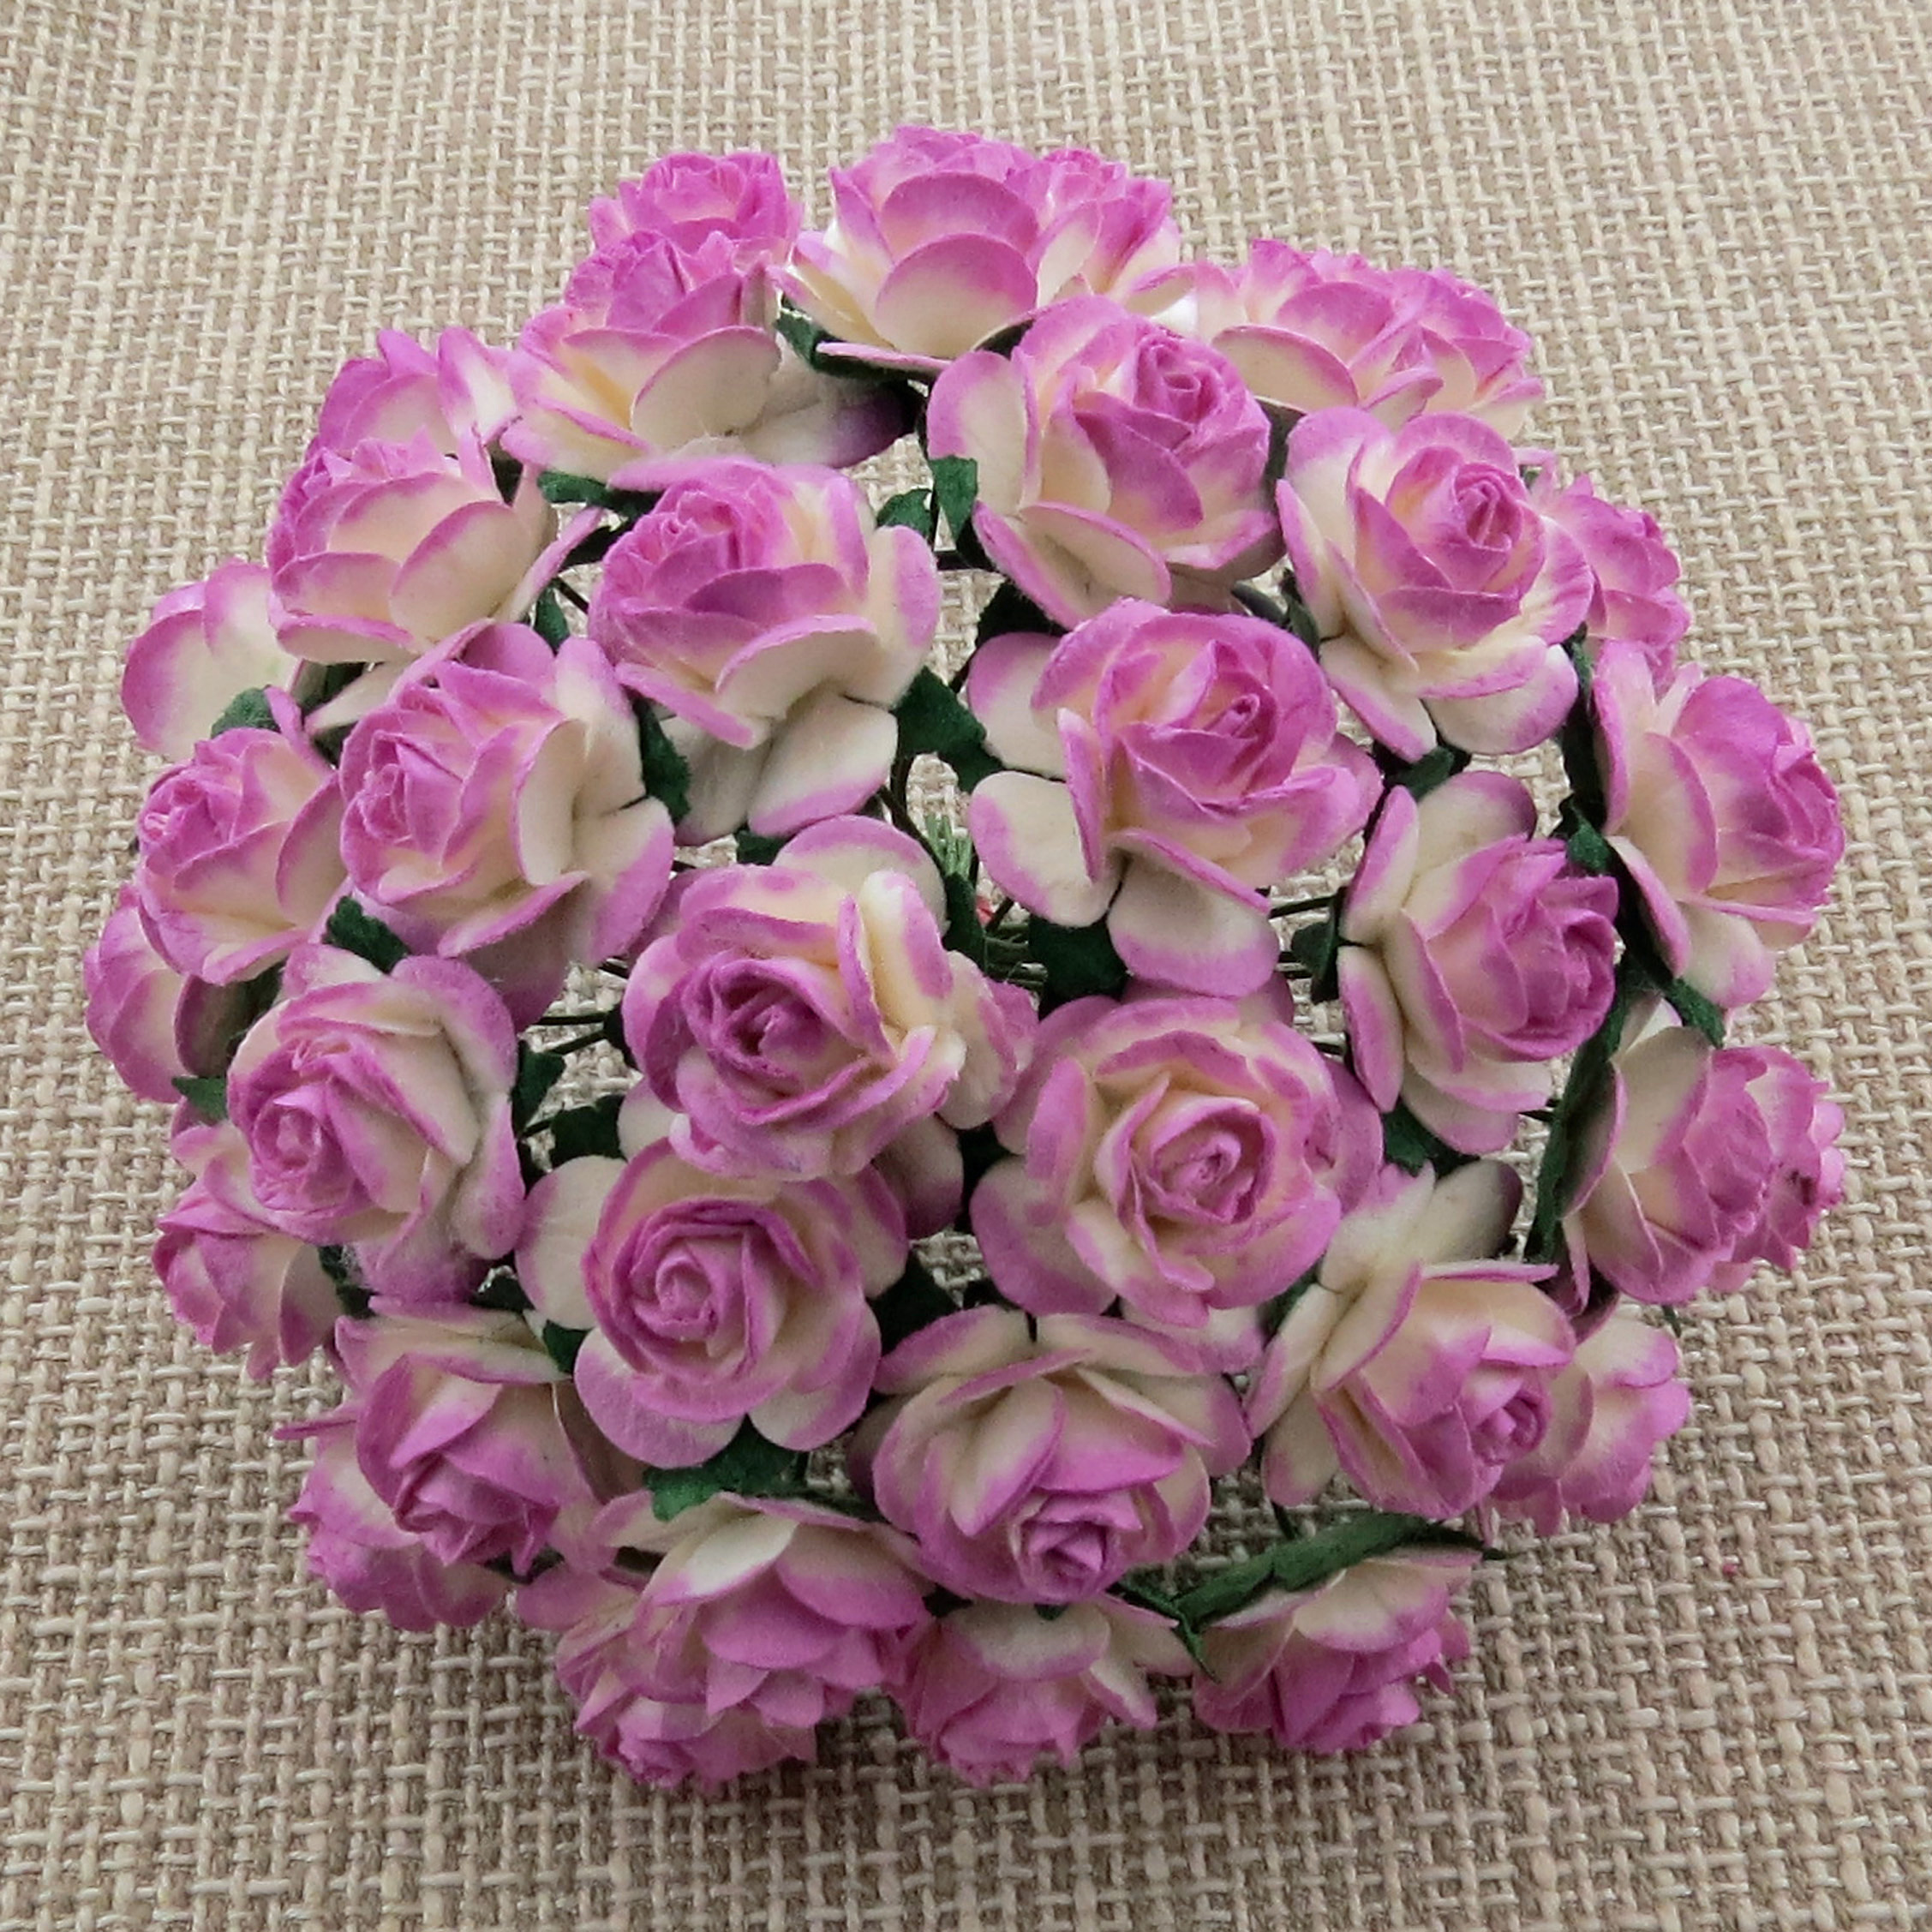 100 2-TONE VIOLET MULBERRY PAPER OPEN ROSES